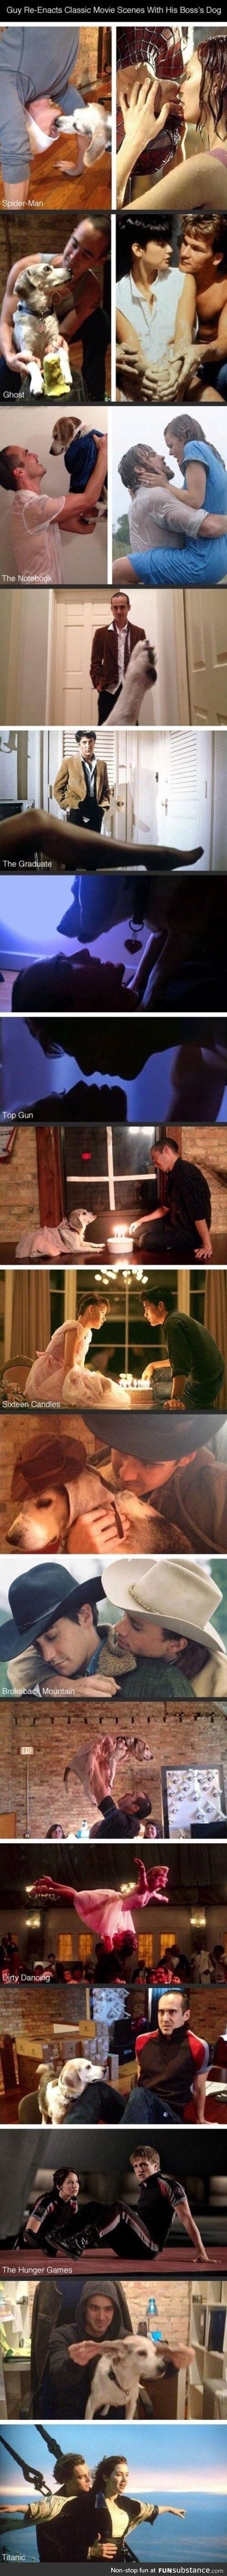 This guy recreated romantic movie scenes with his dog...